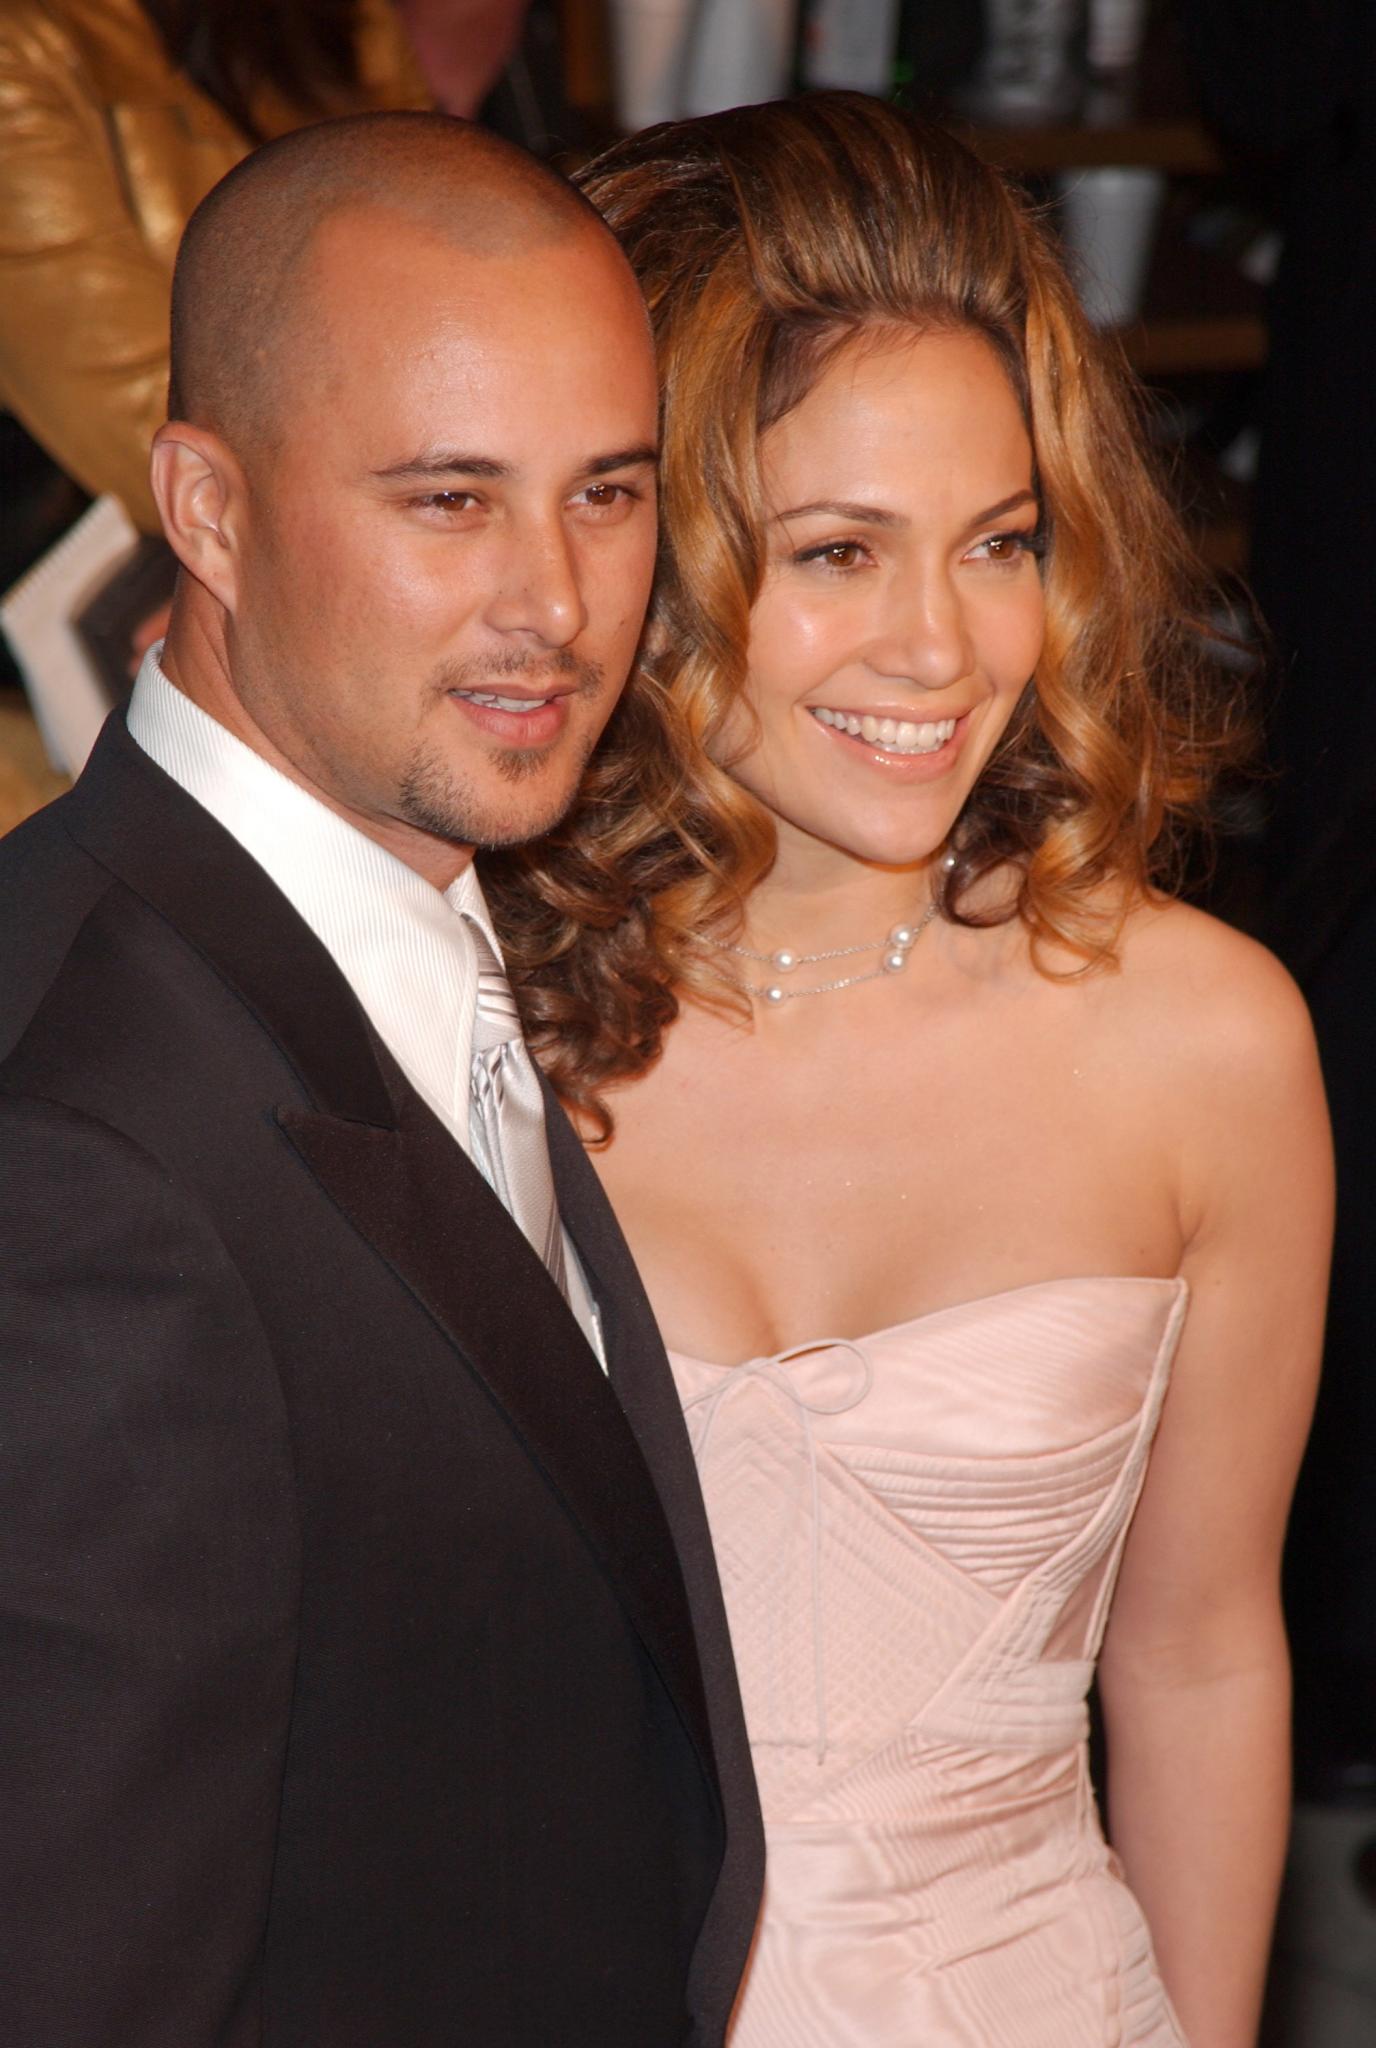 10 Celeb Couples Who Never Made It To Their One-Year Anniversary
